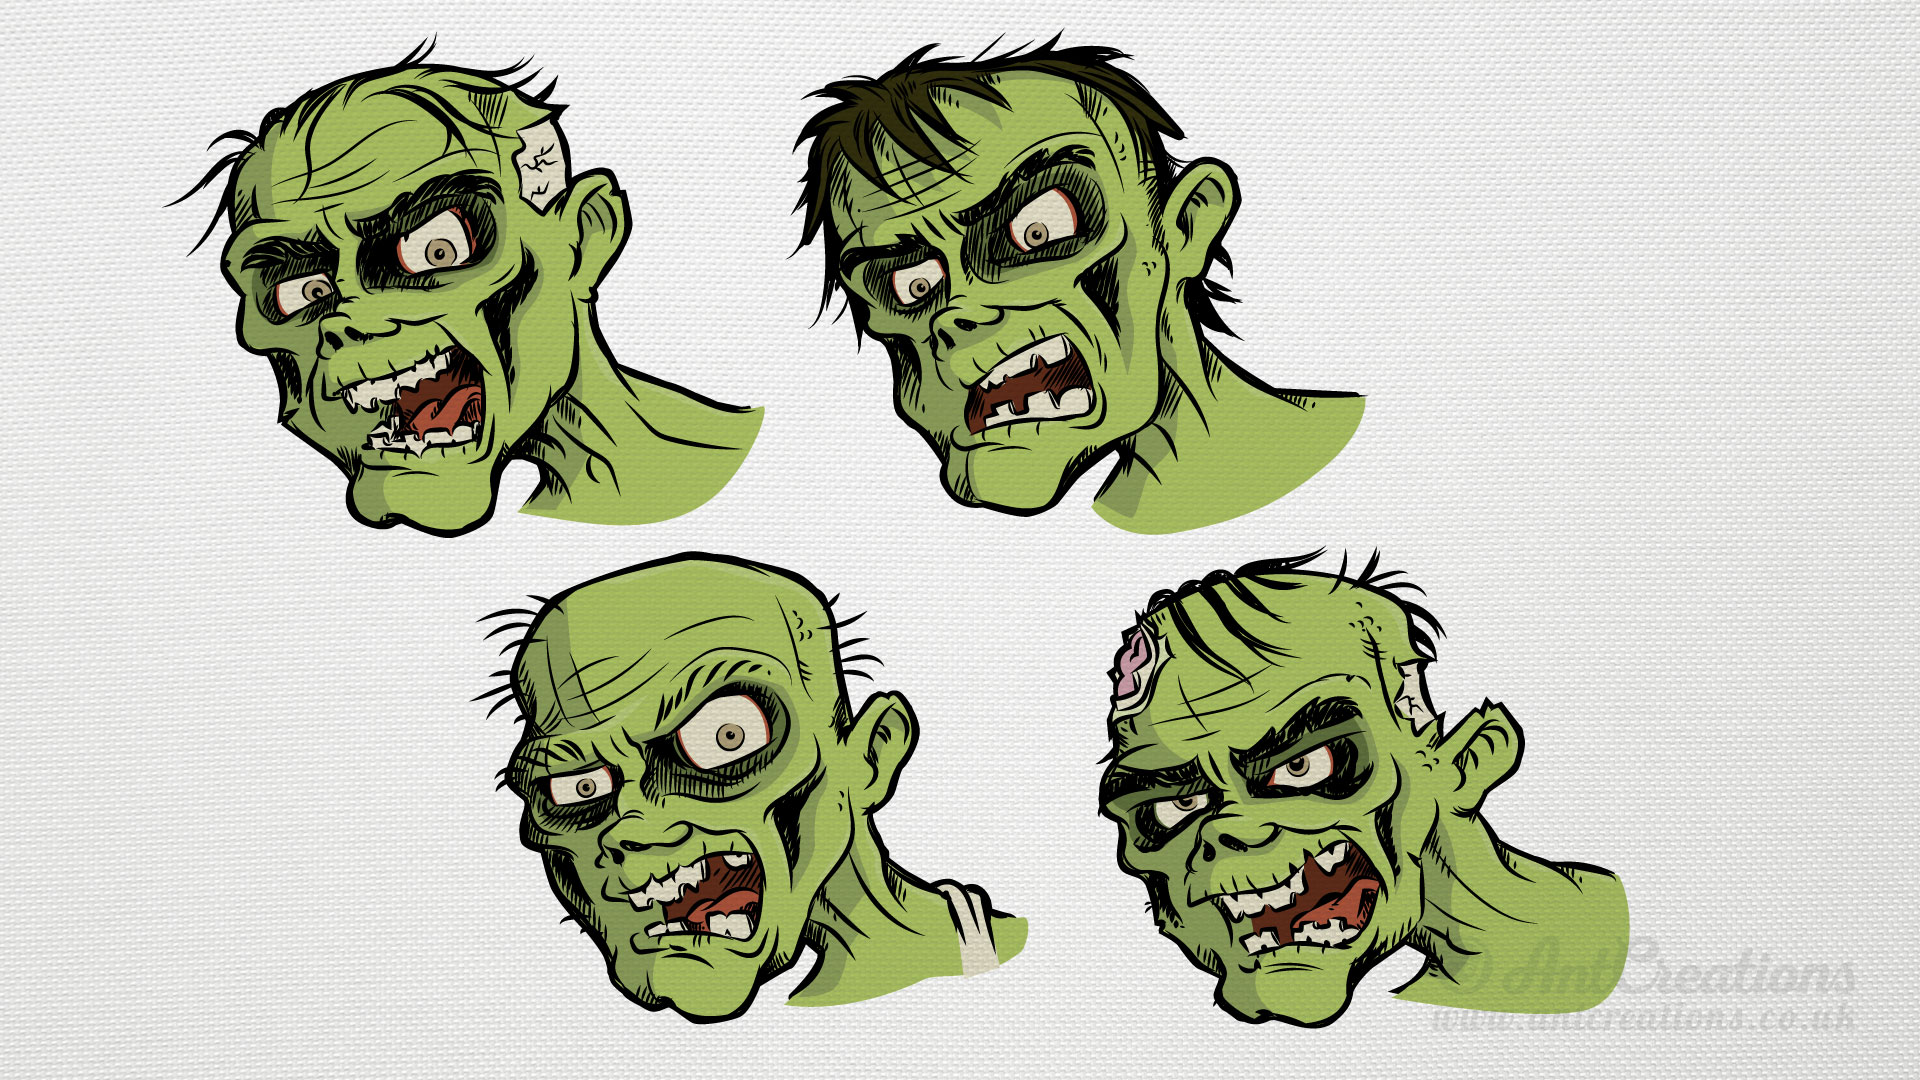 AntCreations-ZombieColourSketches.jpg